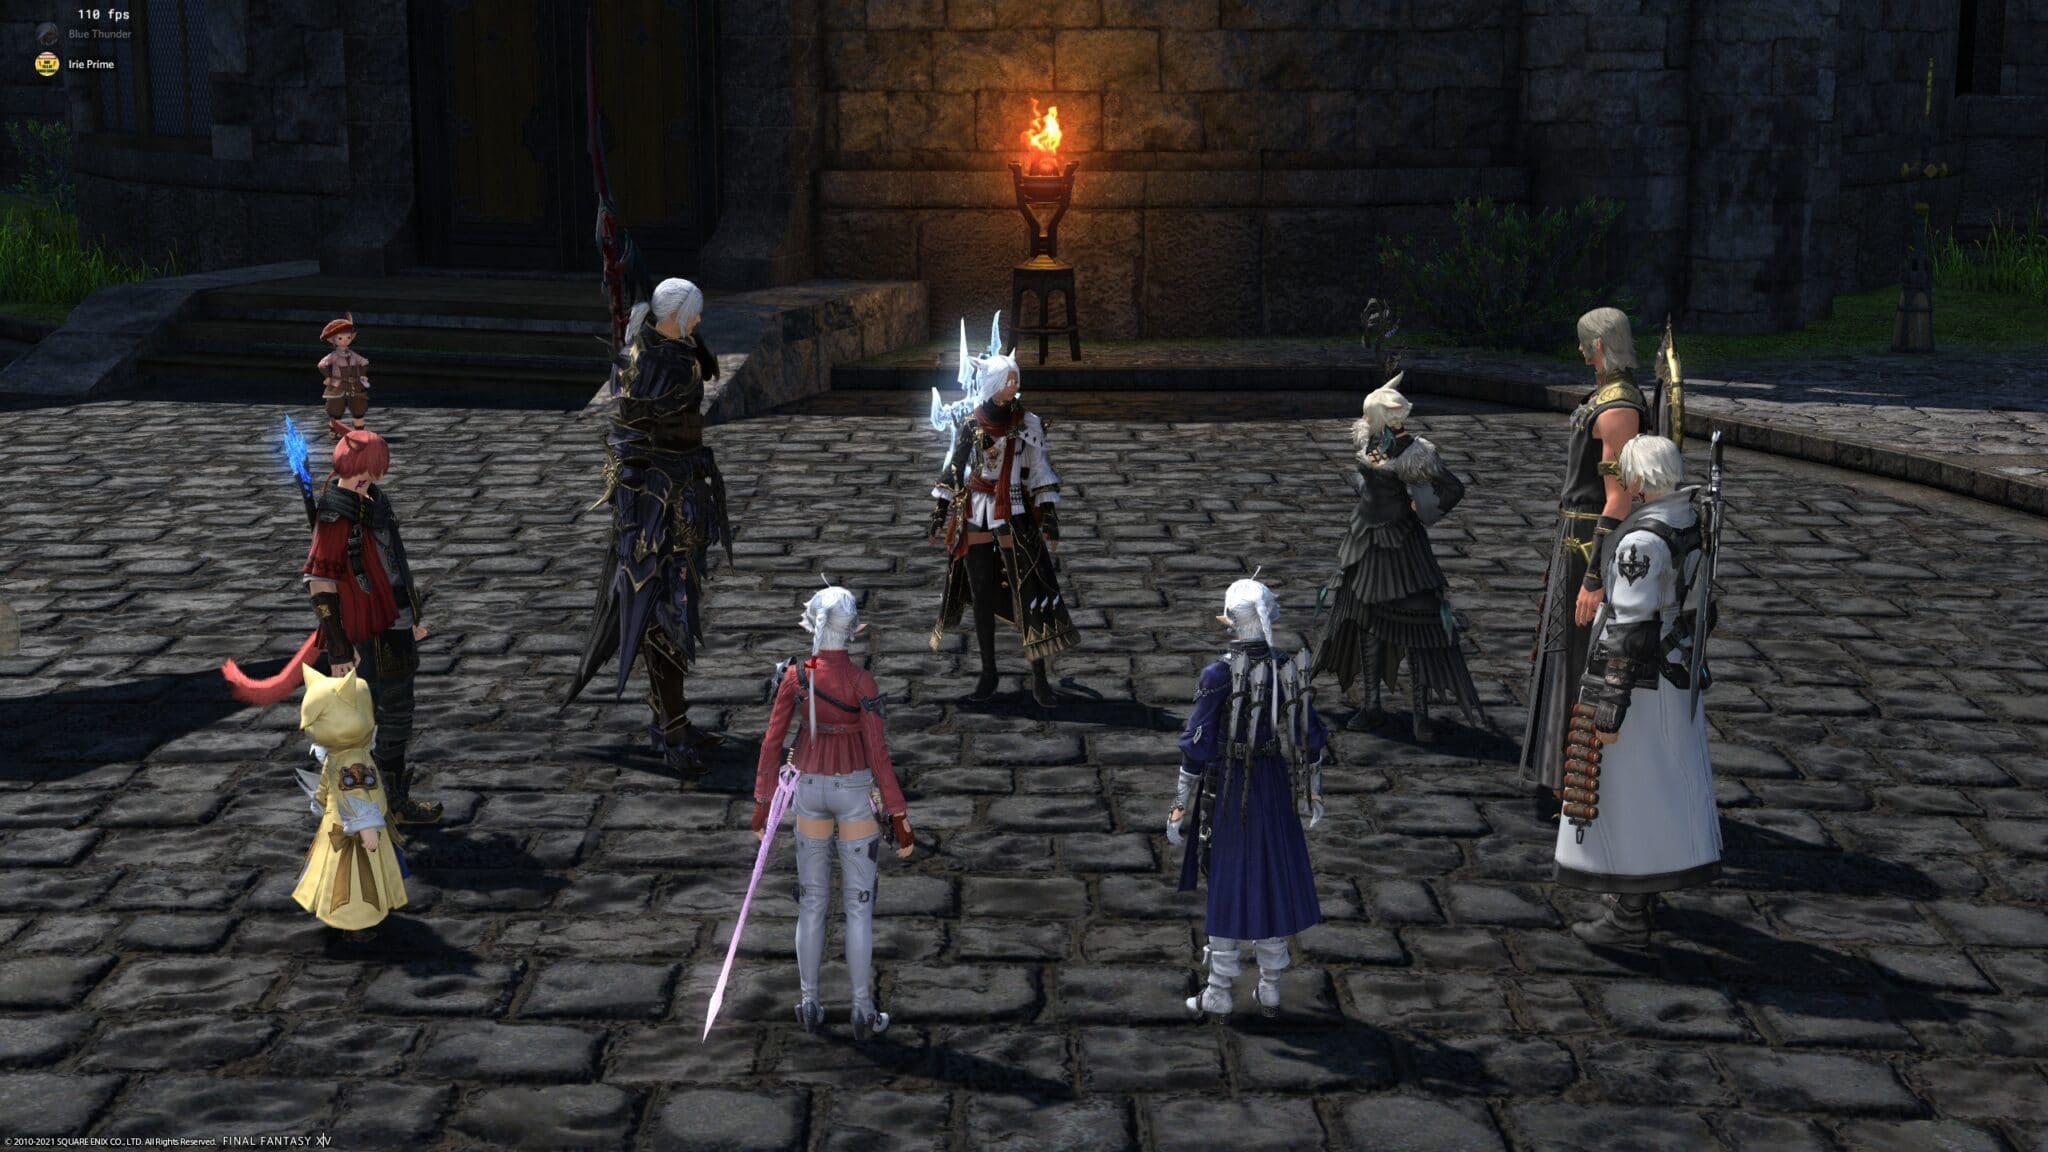 Now if you go into Final Fantasy 14 with no prior knowledge of Endwalker, you'll have no idea who all these people are. Yet they are very important.